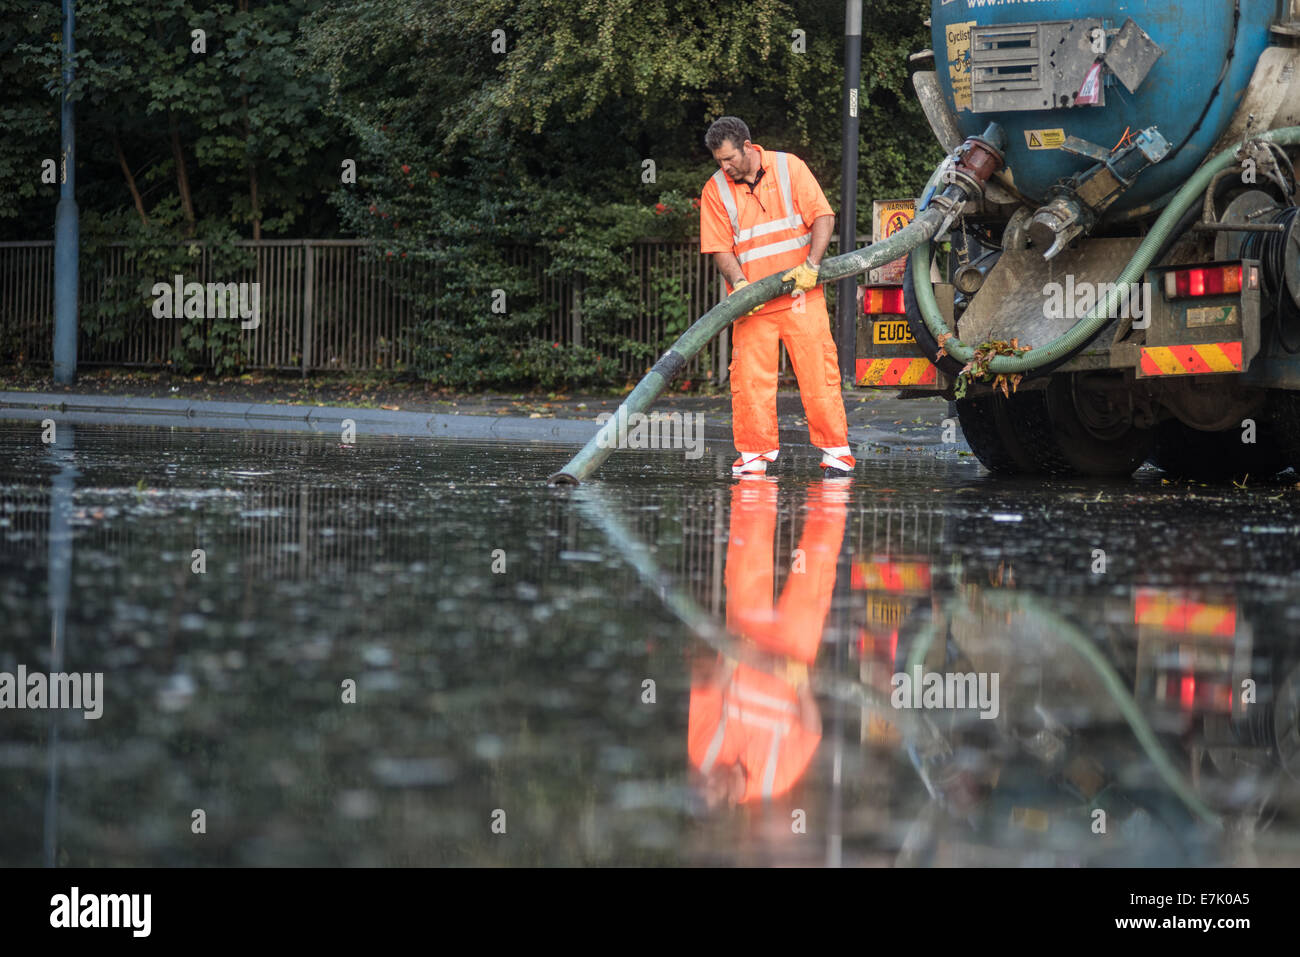 London, UK. 19th September, 2014. A workman using a suction pump in reflected in water as torrential rains cause floods and travel disruptions in East London.  Credit:  Piero Cruciatti/Alamy Live News Stock Photo